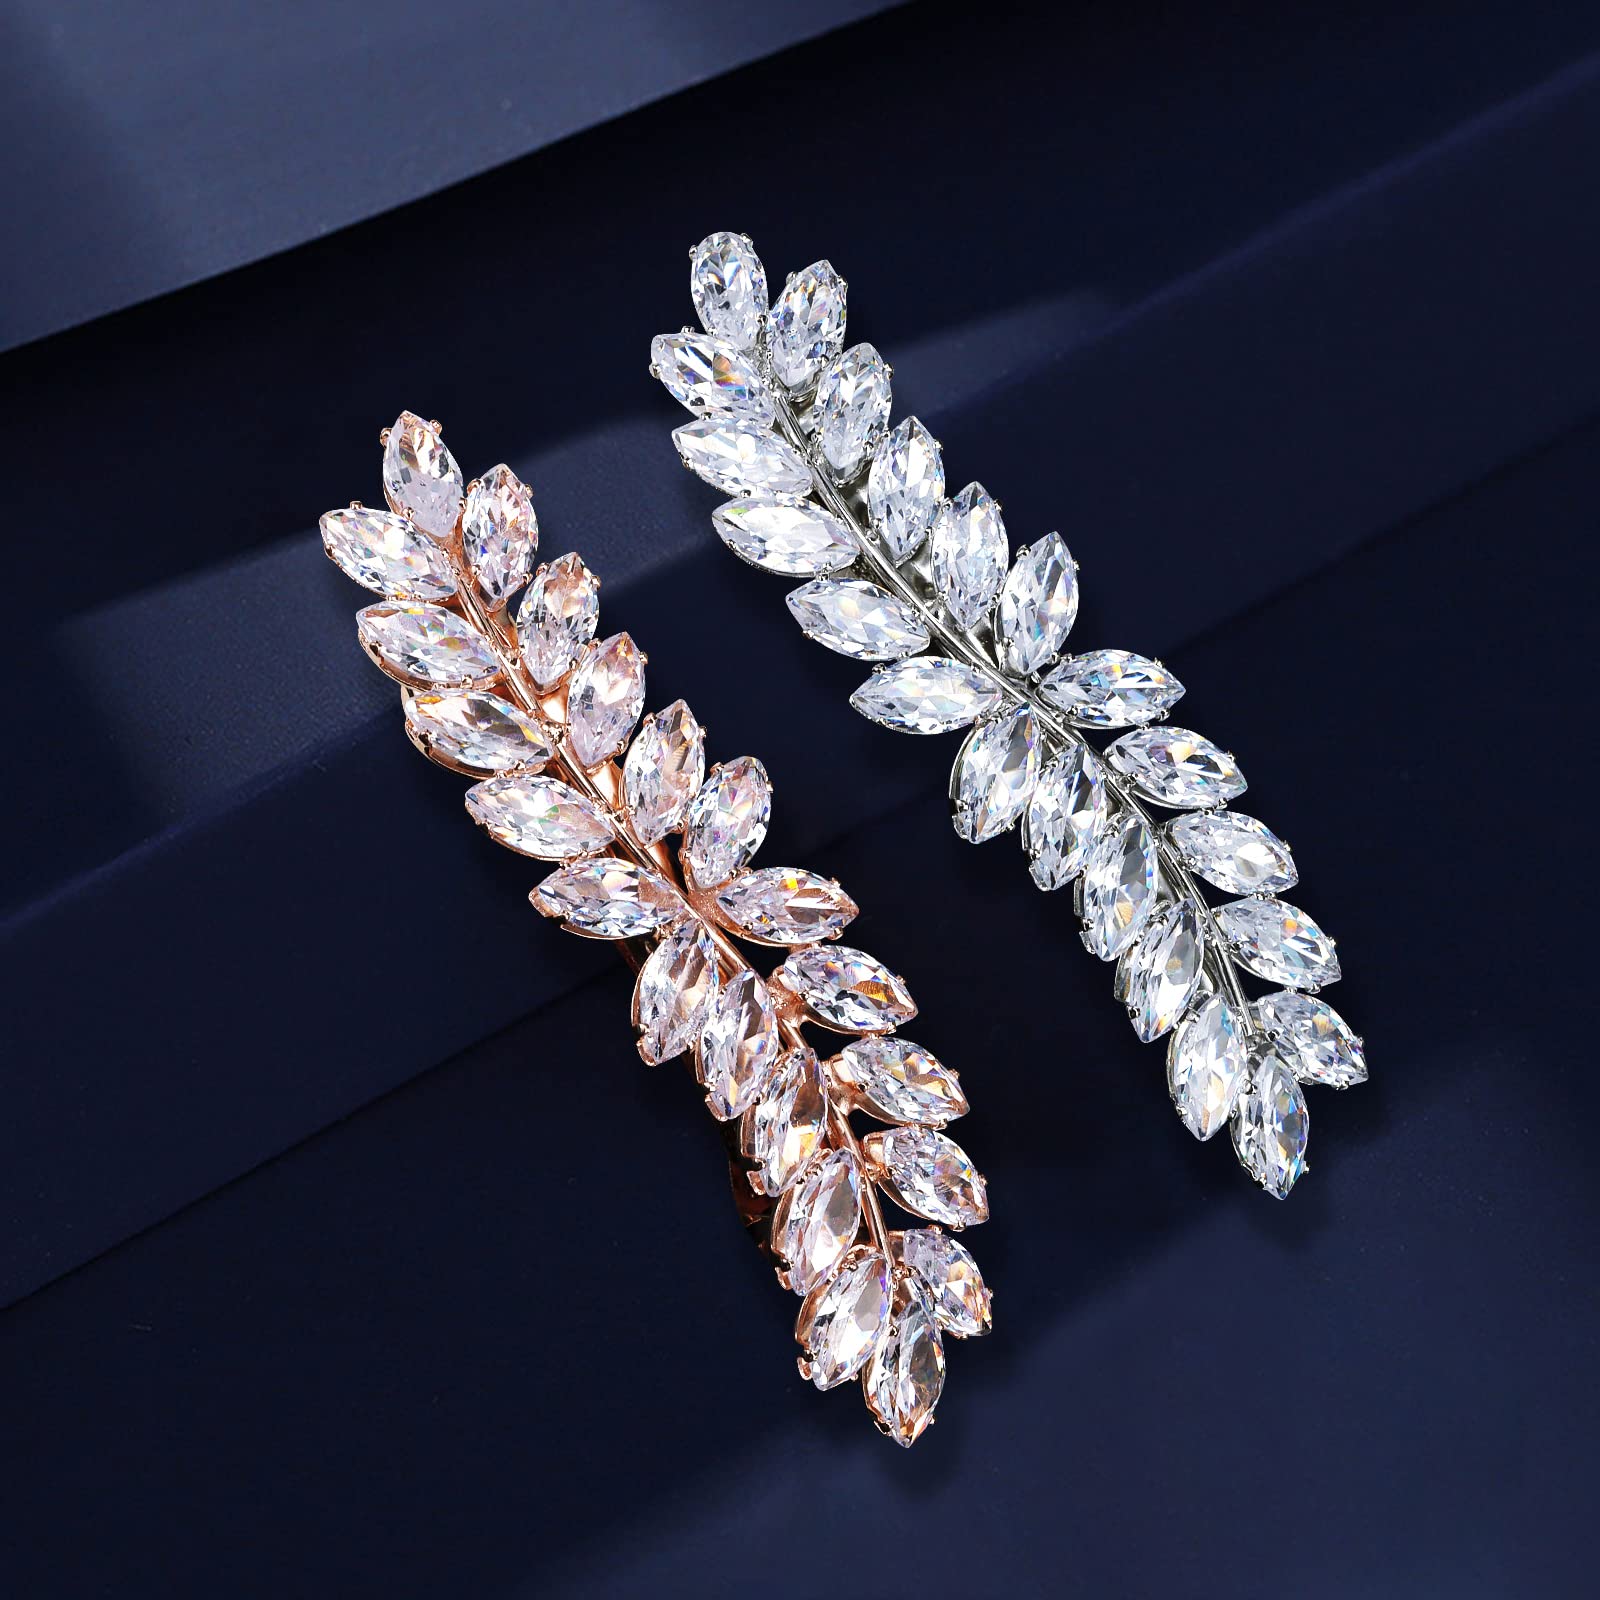 Hair Barrettes for Women,WHAVEL 4pcs Flower Crystal Rhinestones Hair Barrettes Hair Clips Luxury Jewelry Spring French Hair Clips for Women Girls